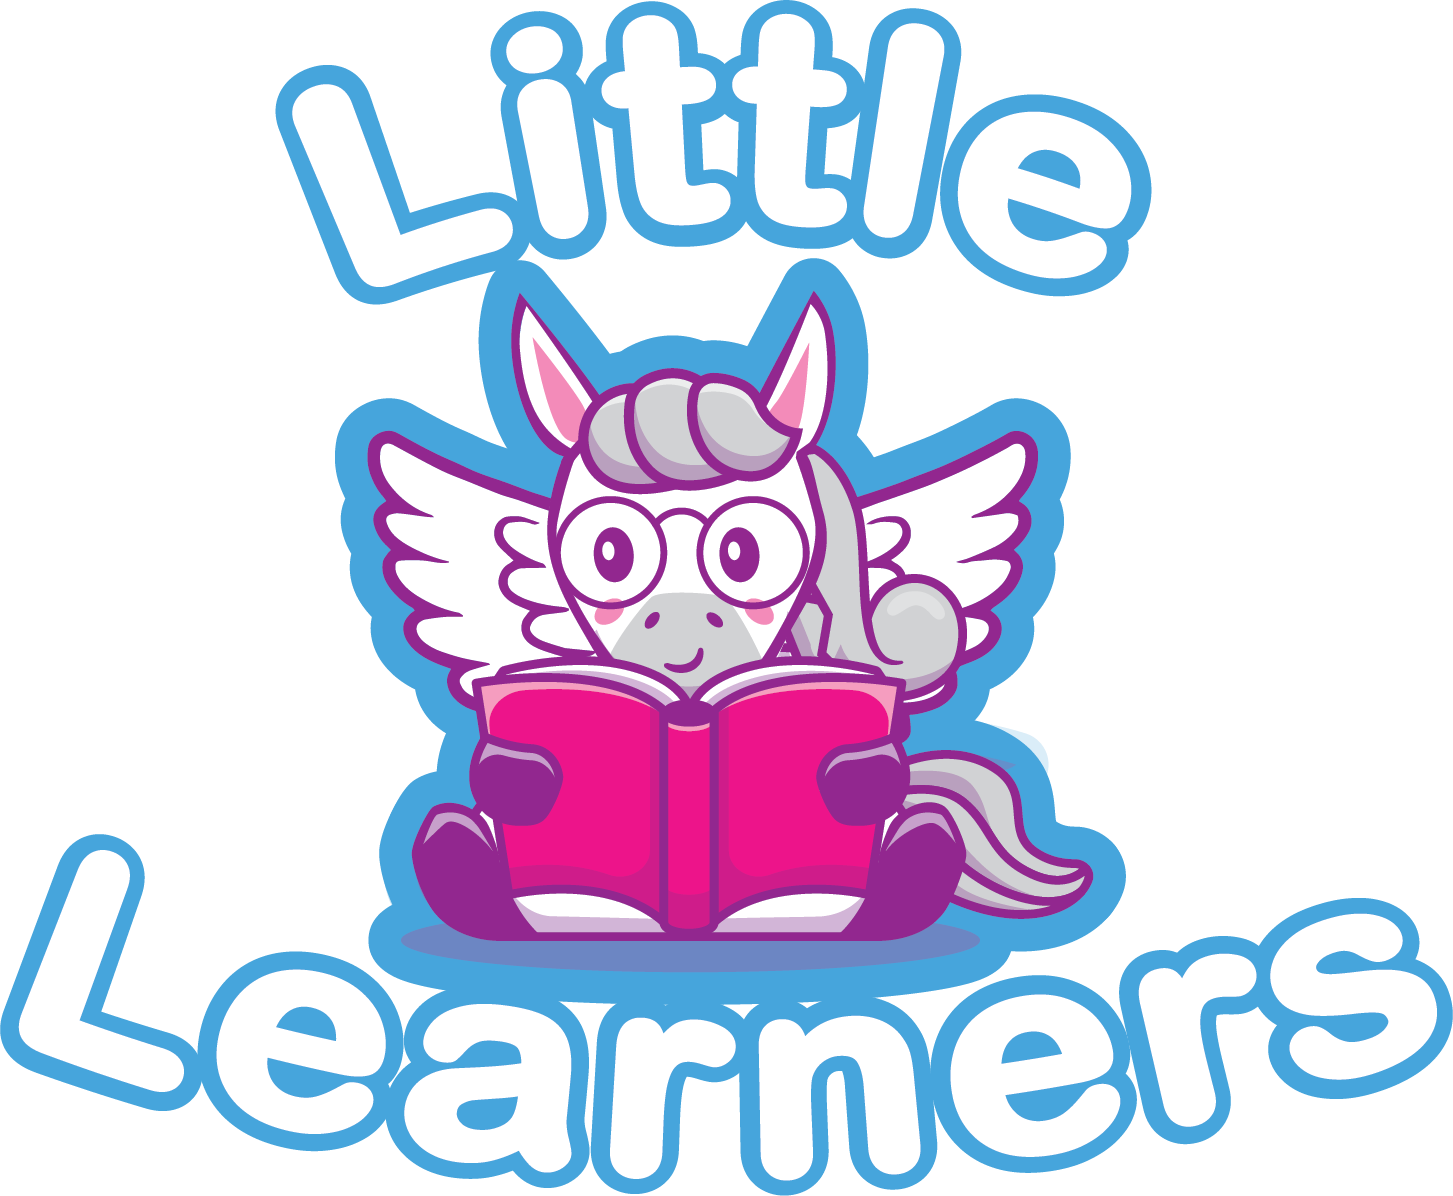 pegasus reading a book with Little Learners text